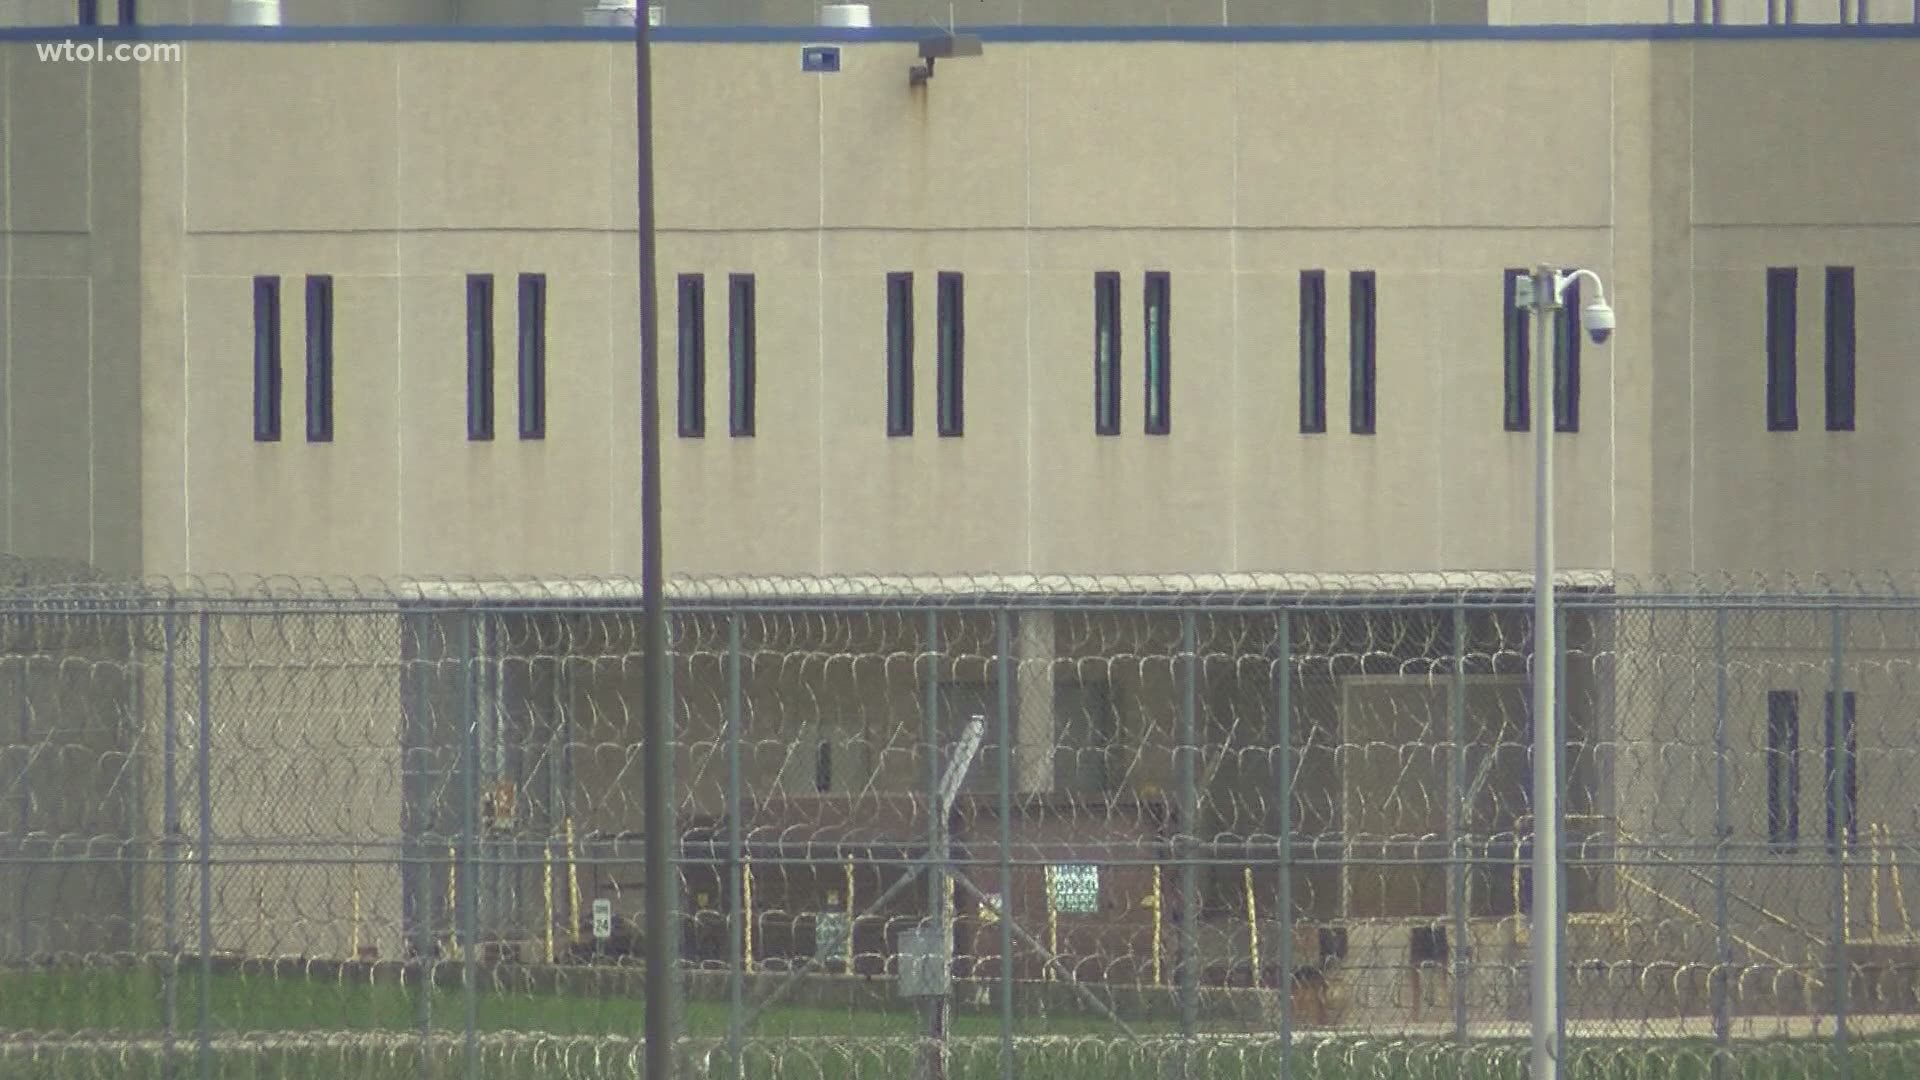 A man who is incarcerated at the facility says inmates are fearful of contracting the disease from the guardsman.